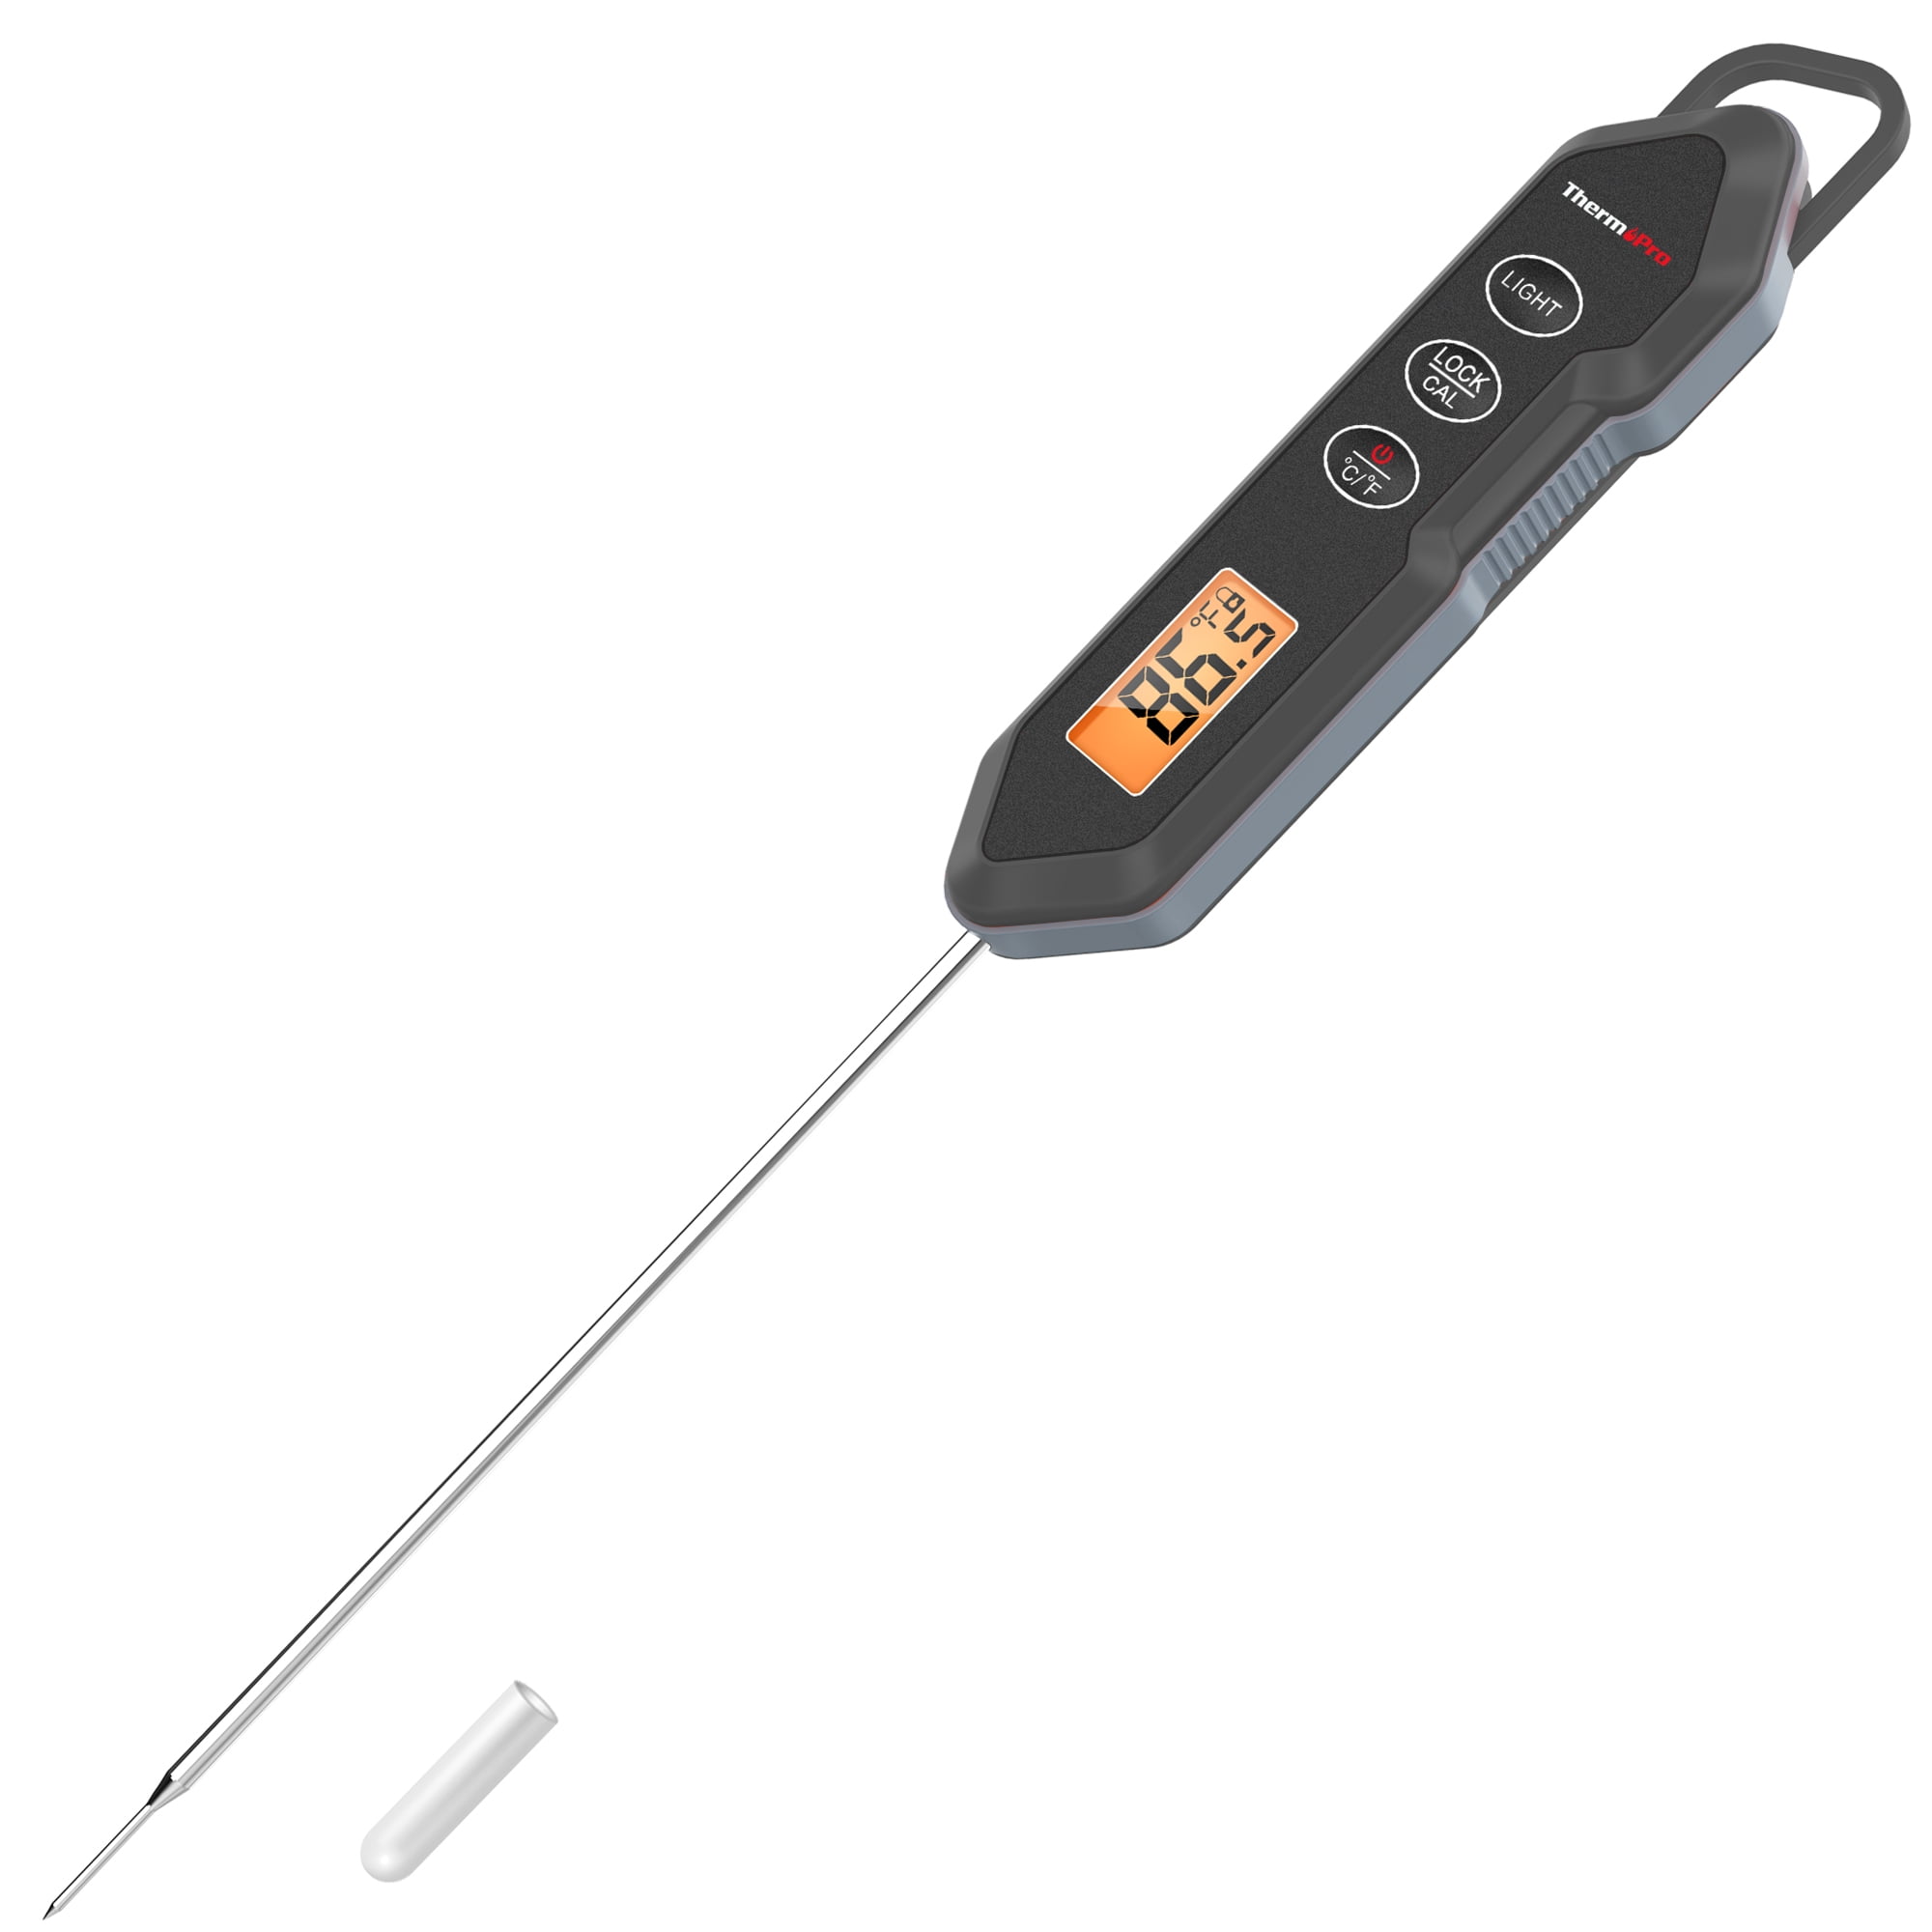 ThermoPro TP15 Digital Waterproof Instant Read Meat Thermometer